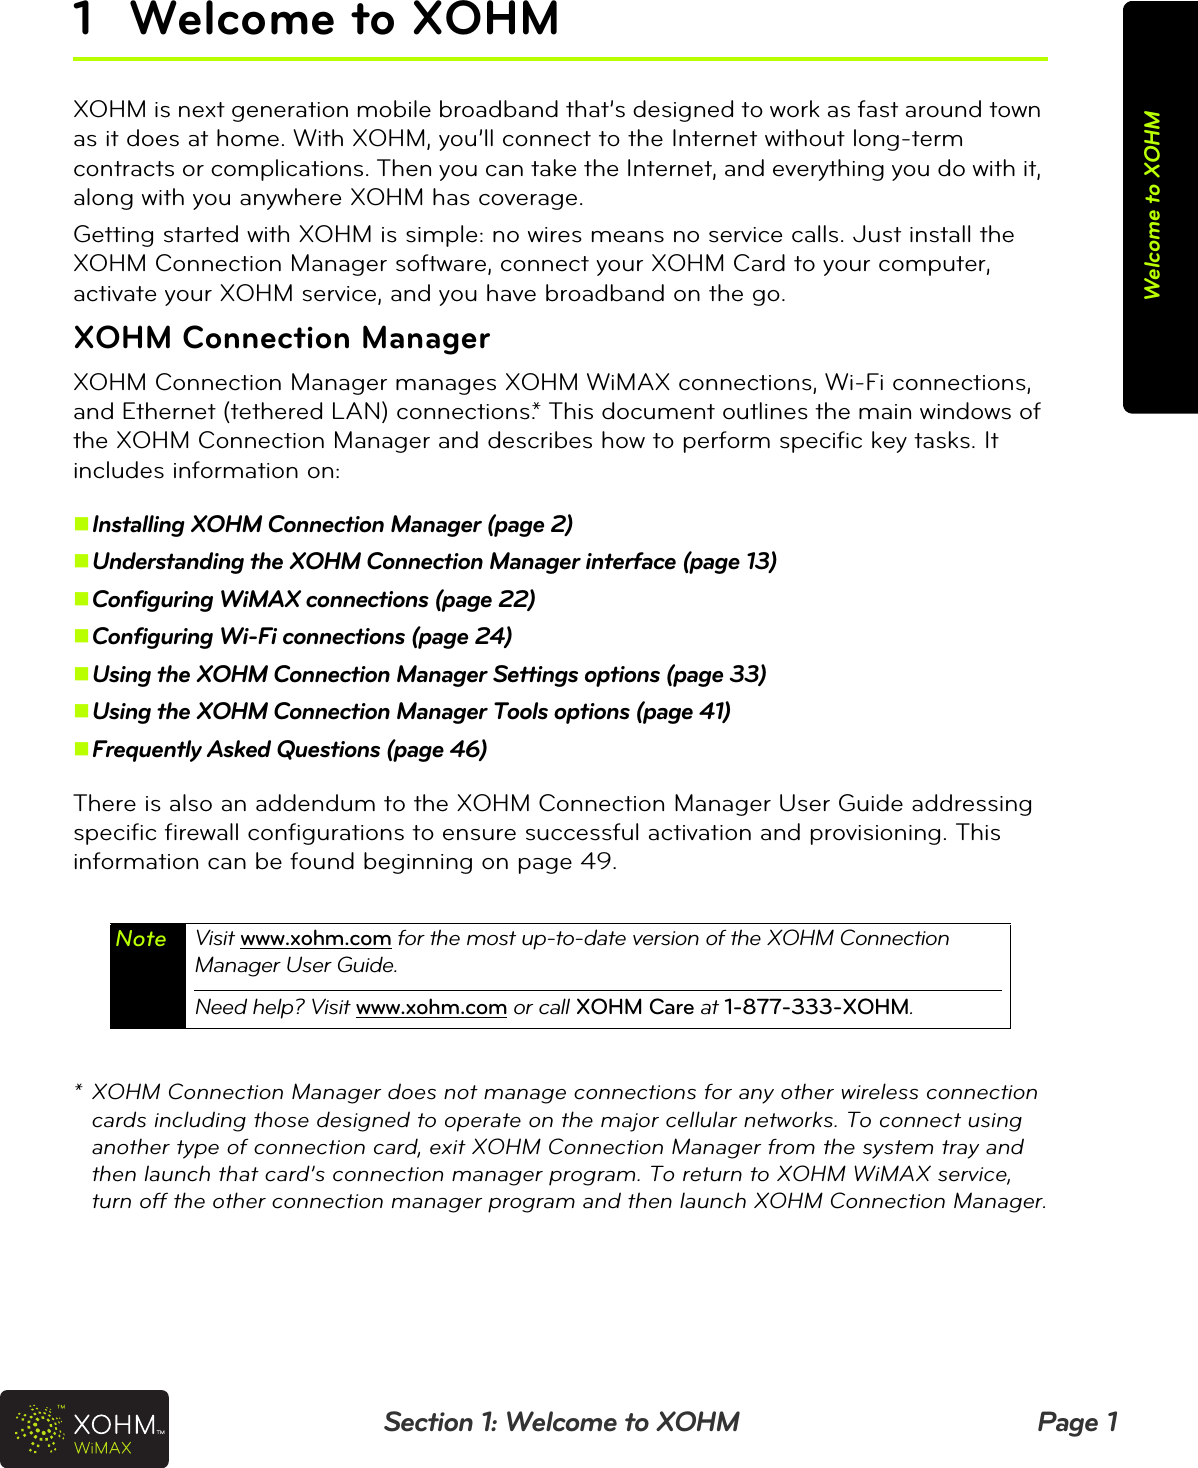 Section 1: Welcome to XOHM Page 1Welcome to XOHM1 Welcome to XOHMXOHM is next generation mobile broadband that’s designed to work as fast around town as it does at home. With XOHM, you’ll connect to the Internet without long-term contracts or complications. Then you can take the Internet, and everything you do with it, along with you anywhere XOHM has coverage.Getting started with XOHM is simple: no wires means no service calls. Just install the XOHM Connection Manager software, connect your XOHM Card to your computer, activate your XOHM service, and you have broadband on the go.XOHM Connection ManagerXOHM Connection Manager manages XOHM WiMAX connections, Wi-Fi connections, and Ethernet (tethered LAN) connections.* This document outlines the main windows of the XOHM Connection Manager and describes how to perform specific key tasks. It includes information on:Installing XOHM Connection Manager (page 2)Understanding the XOHM Connection Manager interface (page 13)Configuring WiMAX connections (page 22)Configuring Wi-Fi connections (page 24)Using the XOHM Connection Manager Settings options (page 33)Using the XOHM Connection Manager Tools options (page 41)Frequently Asked Questions (page 46) There is also an addendum to the XOHM Connection Manager User Guide addressing specific firewall configurations to ensure successful activation and provisioning. This information can be found beginning on page 49.* XOHM Connection Manager does not manage connections for any other wireless connection cards including those designed to operate on the major cellular networks. To connect using another type of connection card, exit XOHM Connection Manager from the system tray and then launch that card’s connection manager program. To return to XOHM WiMAX service, turn off the other connection manager program and then launch XOHM Connection Manager.Note Visit www.xohm.com for the most up-to-date version of the XOHM Connection Manager User Guide.Need help? Visit www.xohm.com or call XOHM Care at 1-877-333-XOHM.